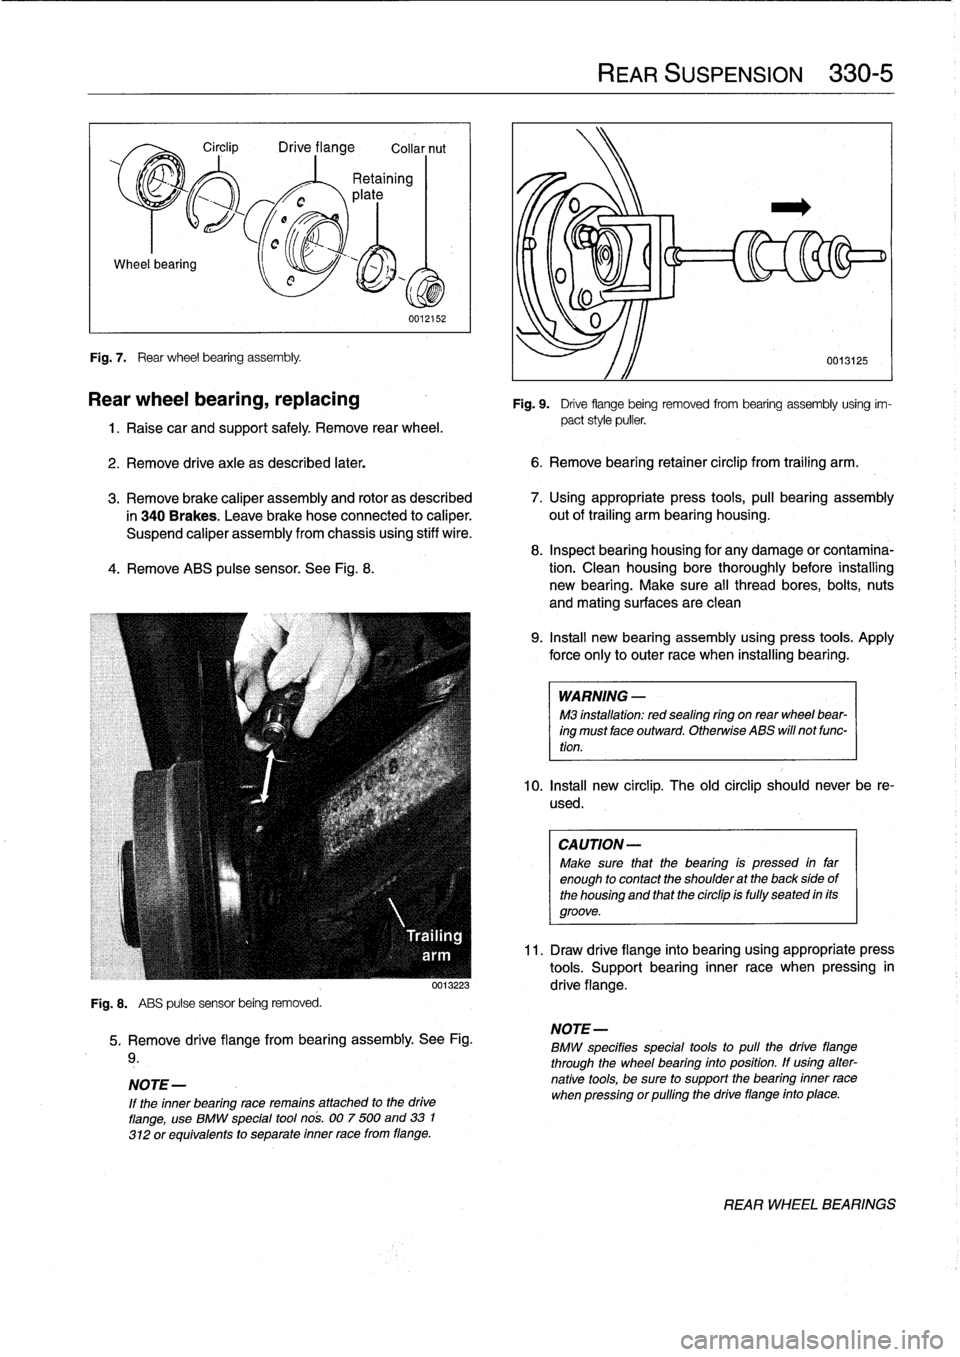 BMW 328i 1994 E36 Owners Guide Wheel
bearing

Fig
.
7
.

	

Rear
wheel
bearing
assembly
.

Circlip

	

Drive
flange

	

Collar
nut

0012152

Rear
wheel
bearing,
replacing

1
.
Raise
car
and
support
safely
.
Remove
rear
wheel
.

2
.